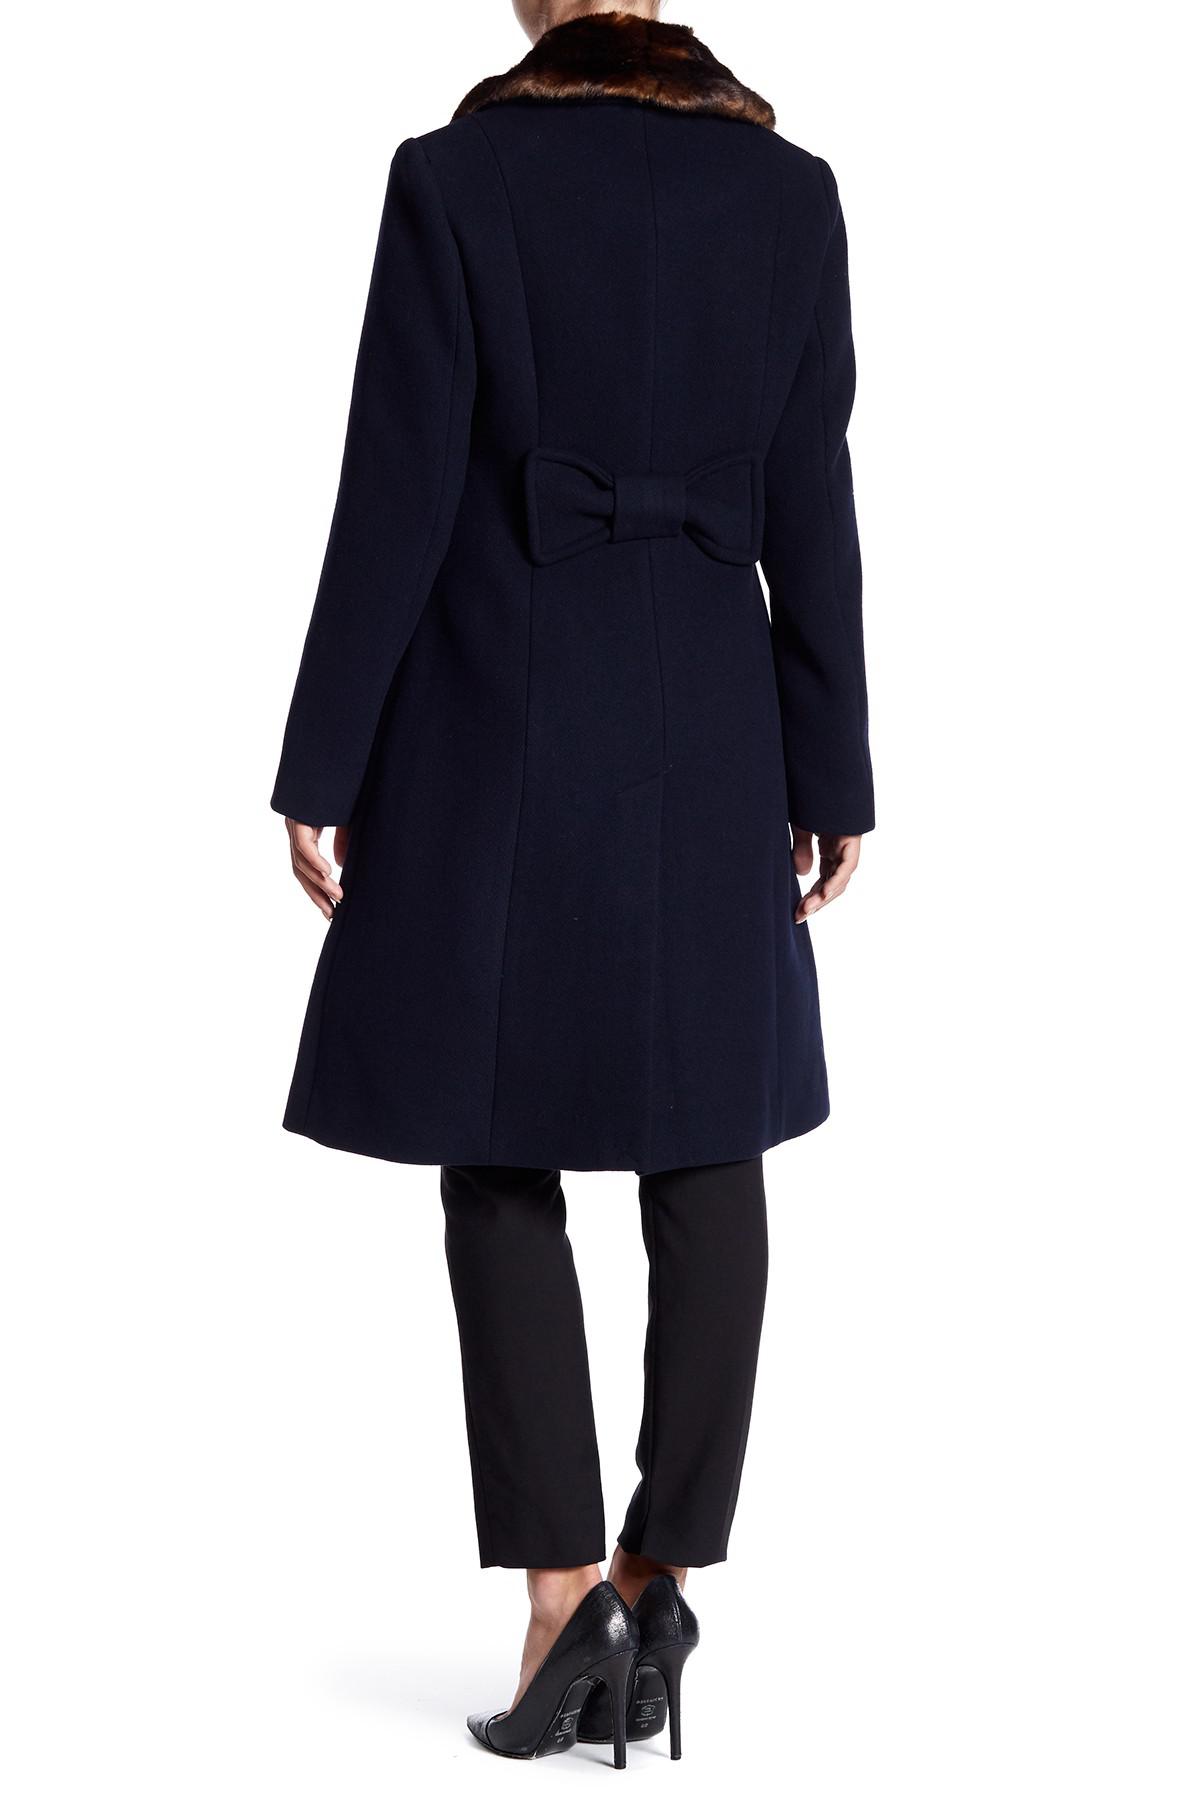 Kate Spade Faux Fur Collar Back Bow Coat in Blue - Lyst